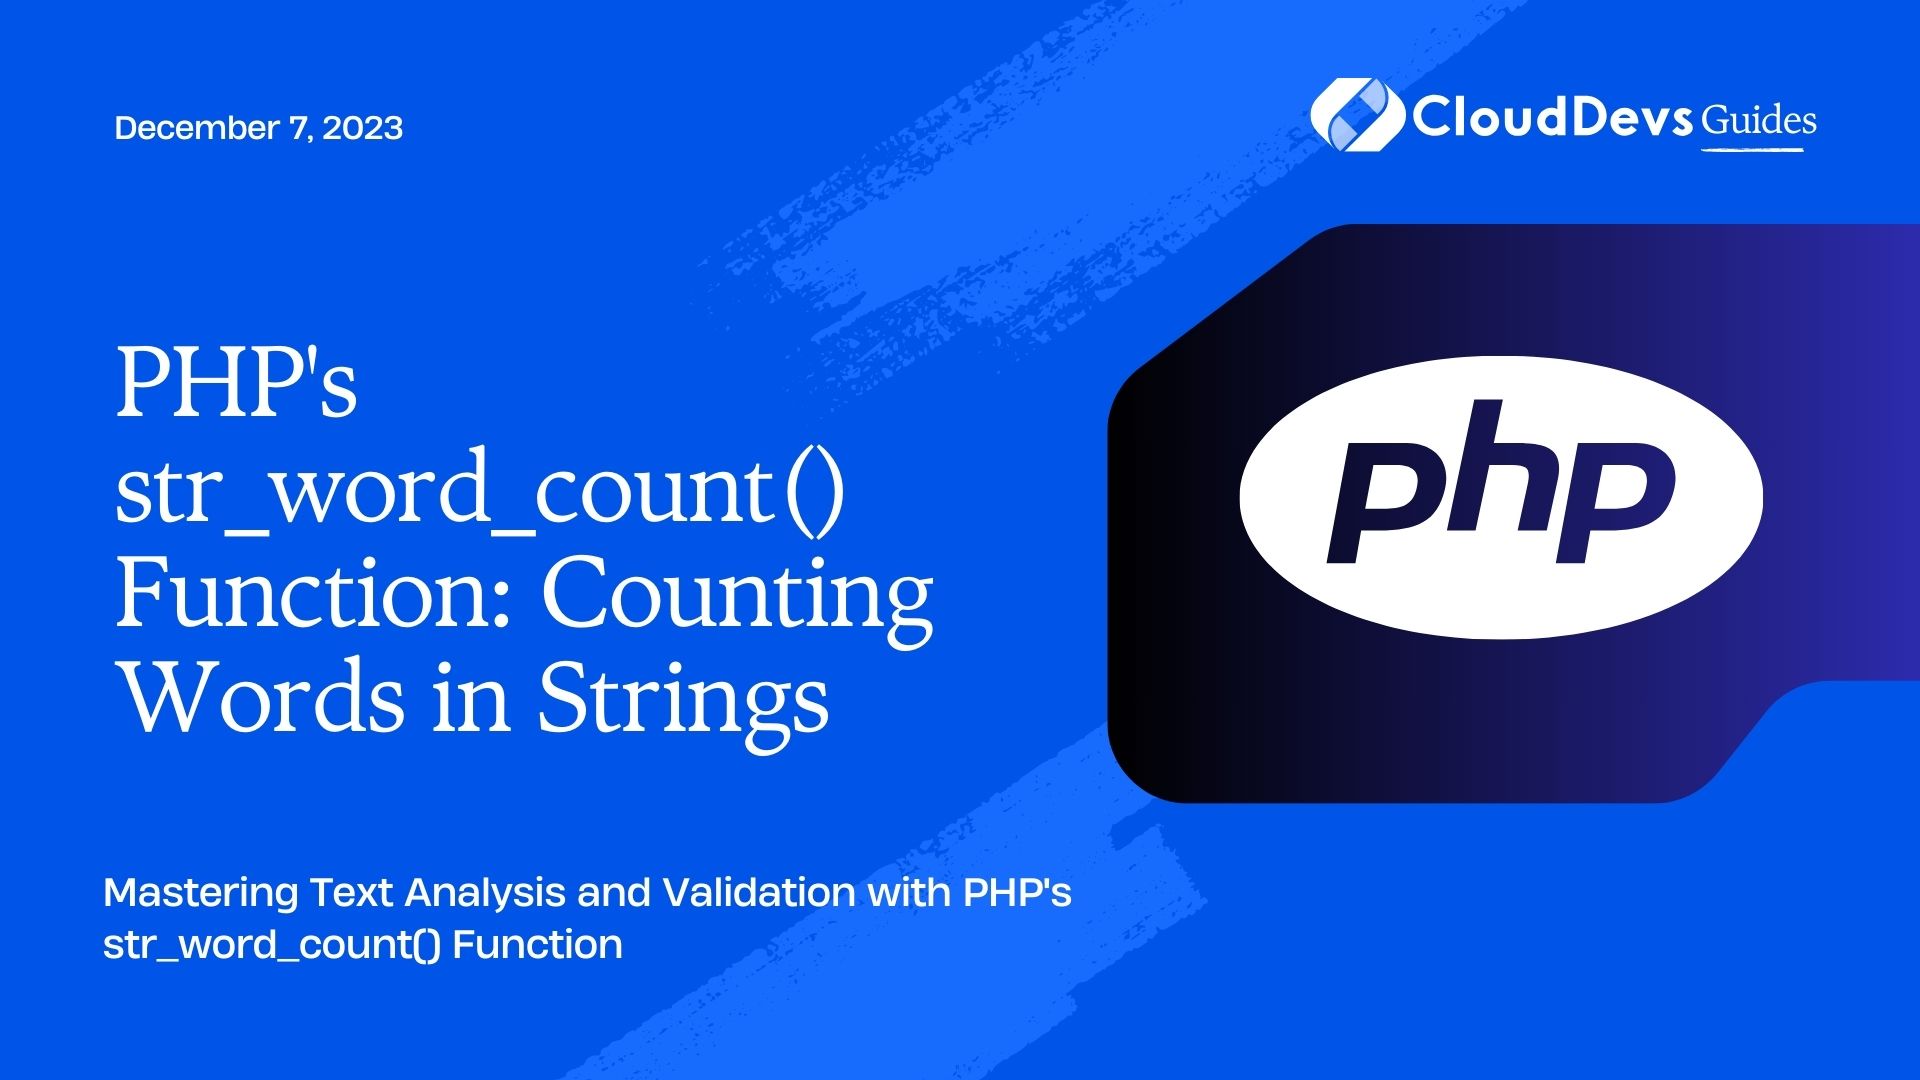 PHP's str_word_count() Function: Counting Words in Strings